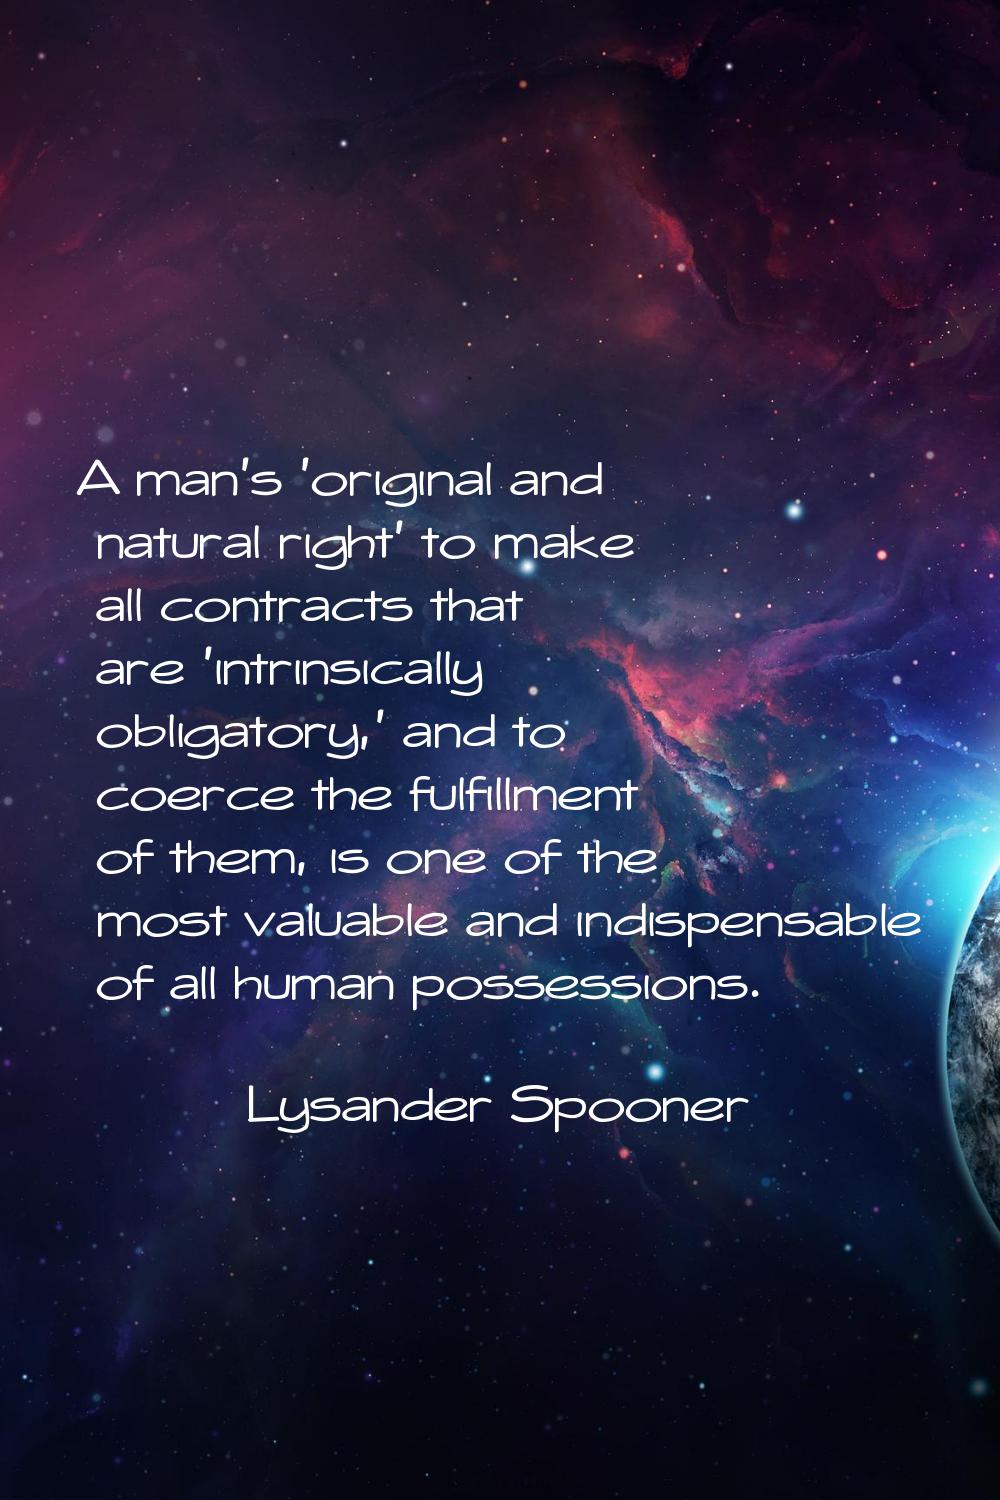 A man's 'original and natural right' to make all contracts that are 'intrinsically obligatory,' and